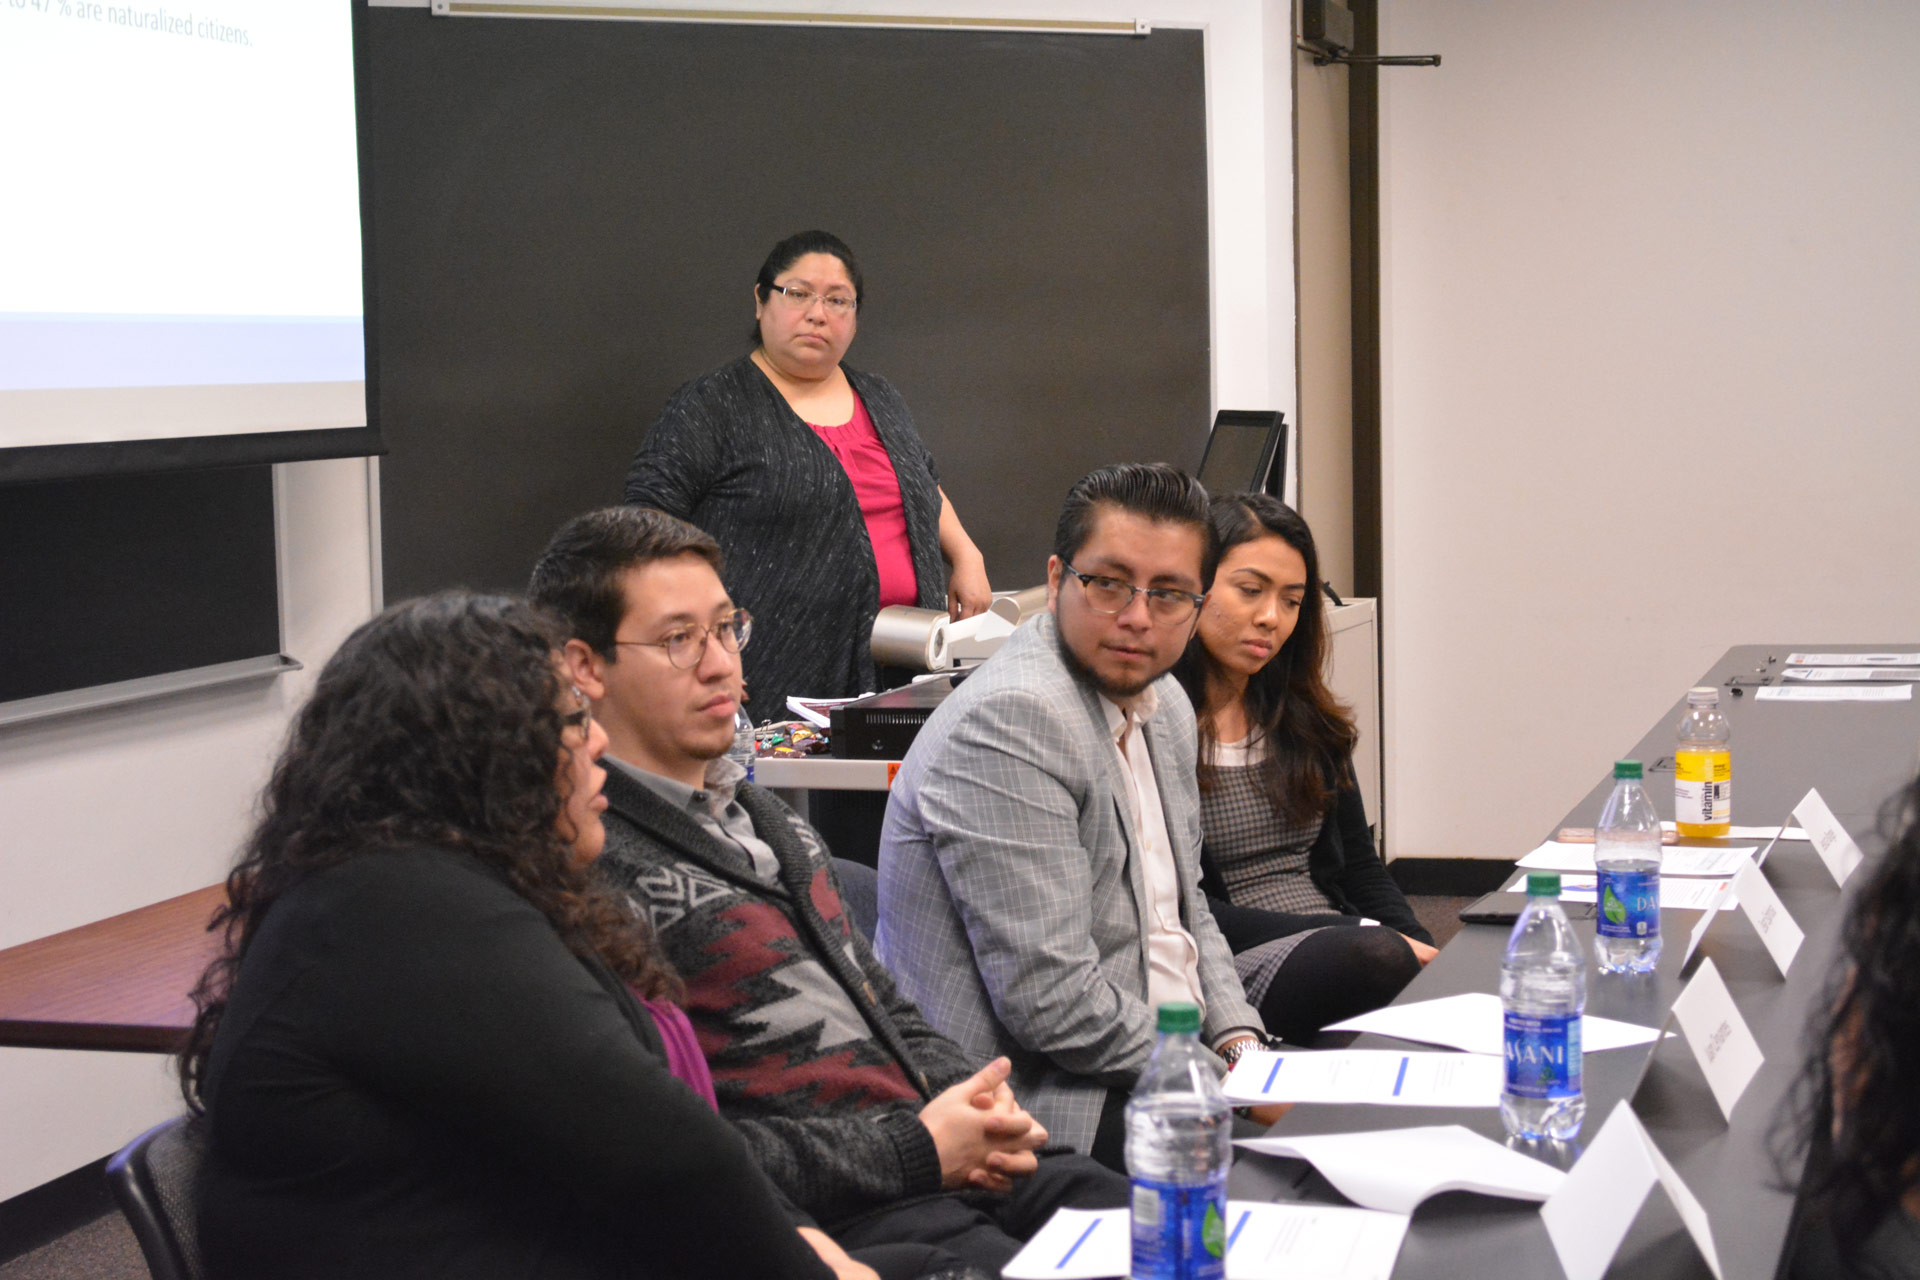 Continuing Ed panel discussion addresses questions about DACA and Dreamers